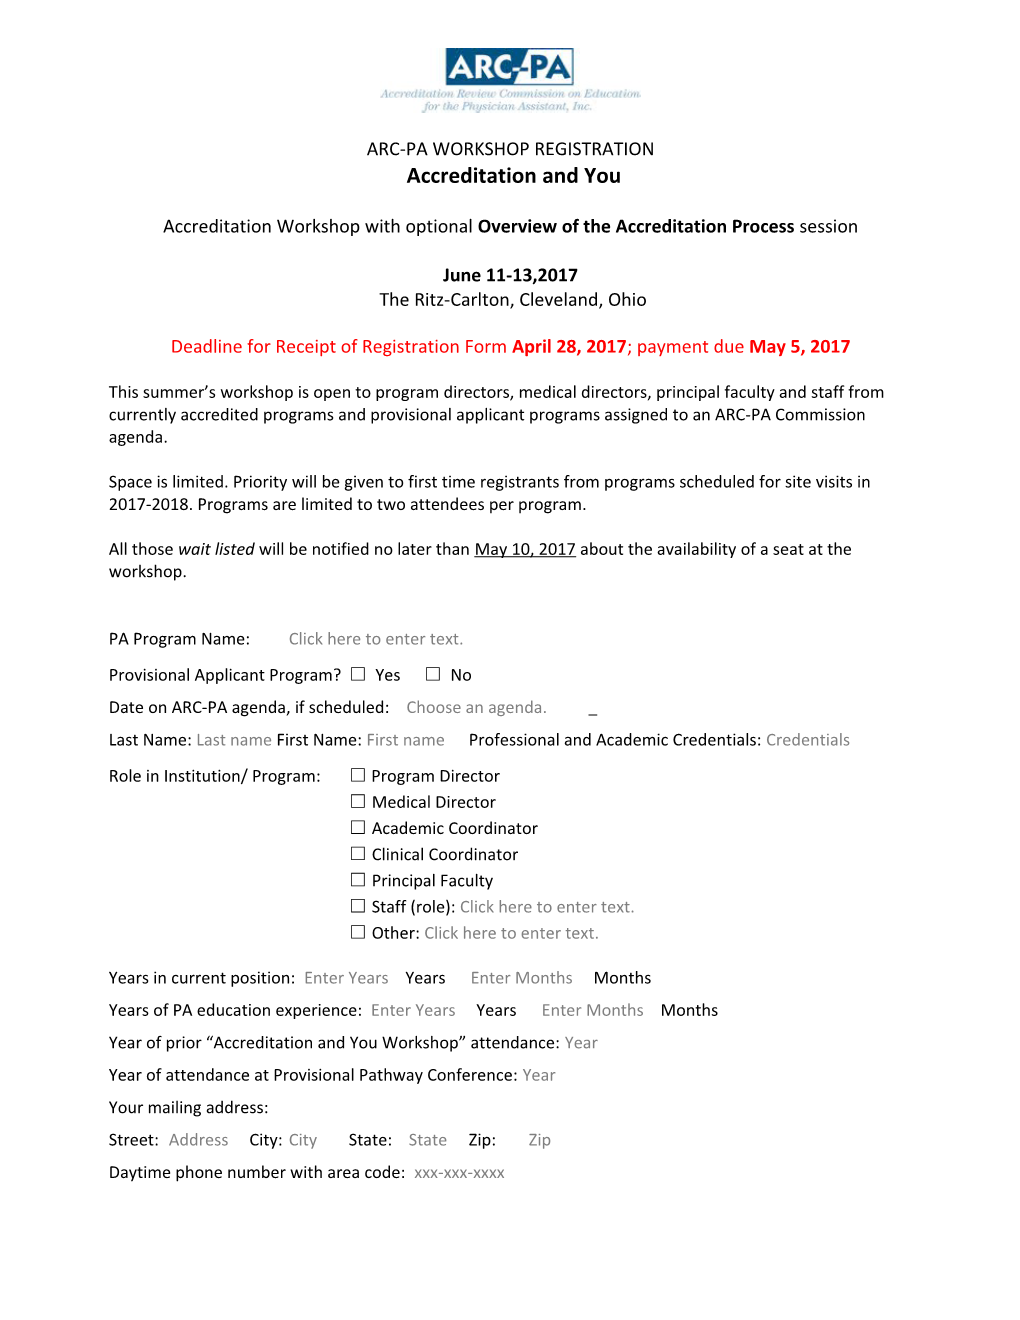 Accreditation and You REGISTRATION Page 2